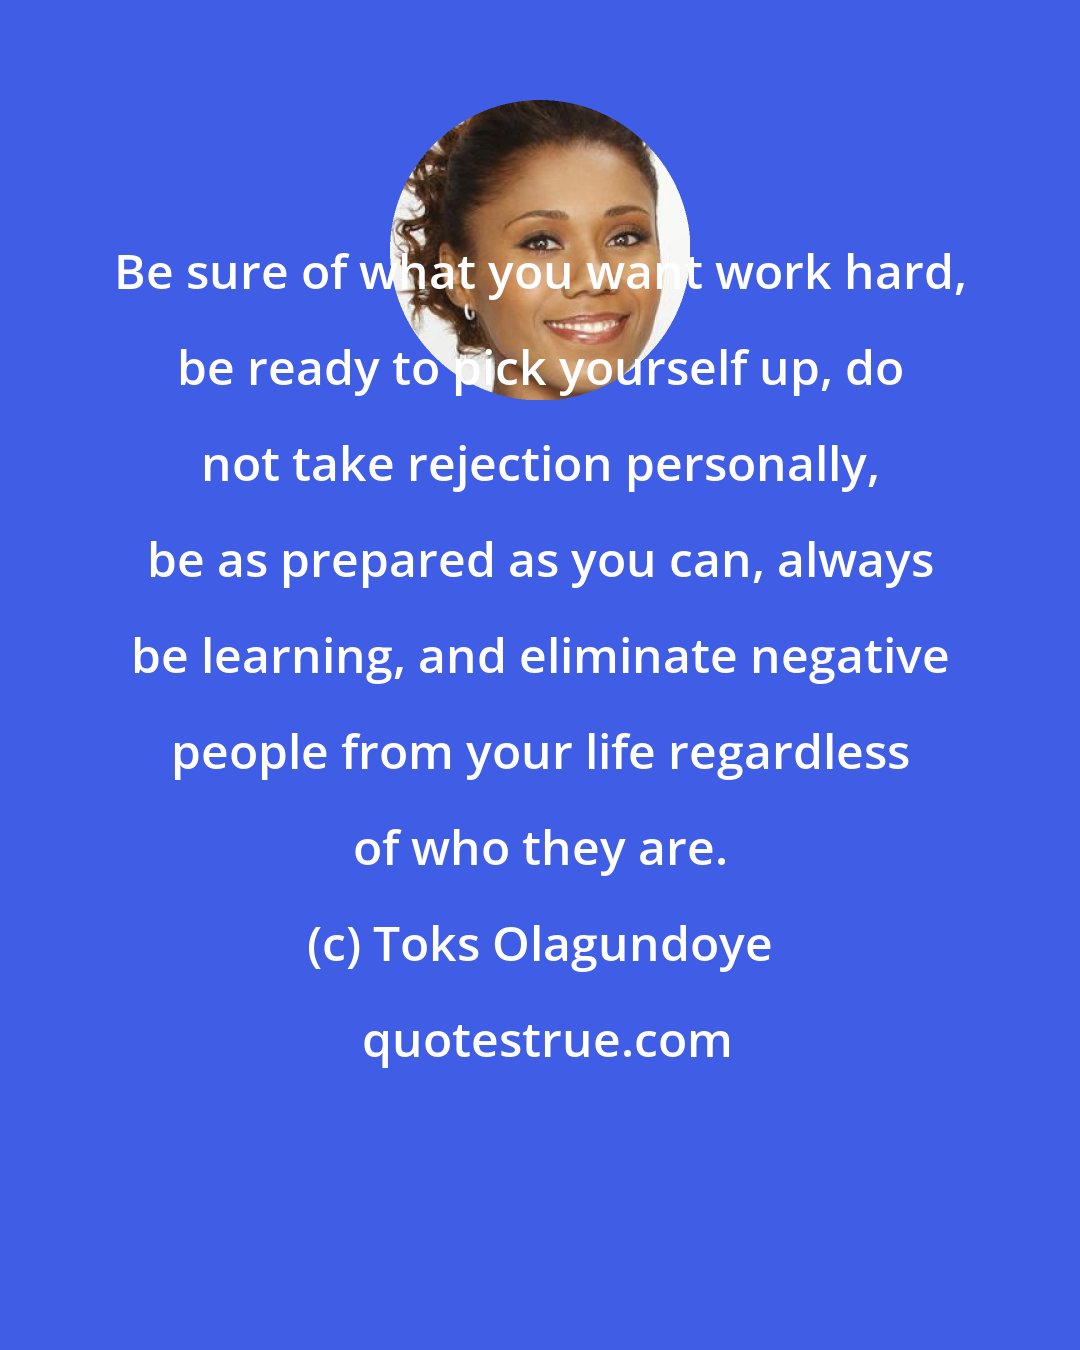 Toks Olagundoye: Be sure of what you want work hard, be ready to pick yourself up, do not take rejection personally, be as prepared as you can, always be learning, and eliminate negative people from your life regardless of who they are.